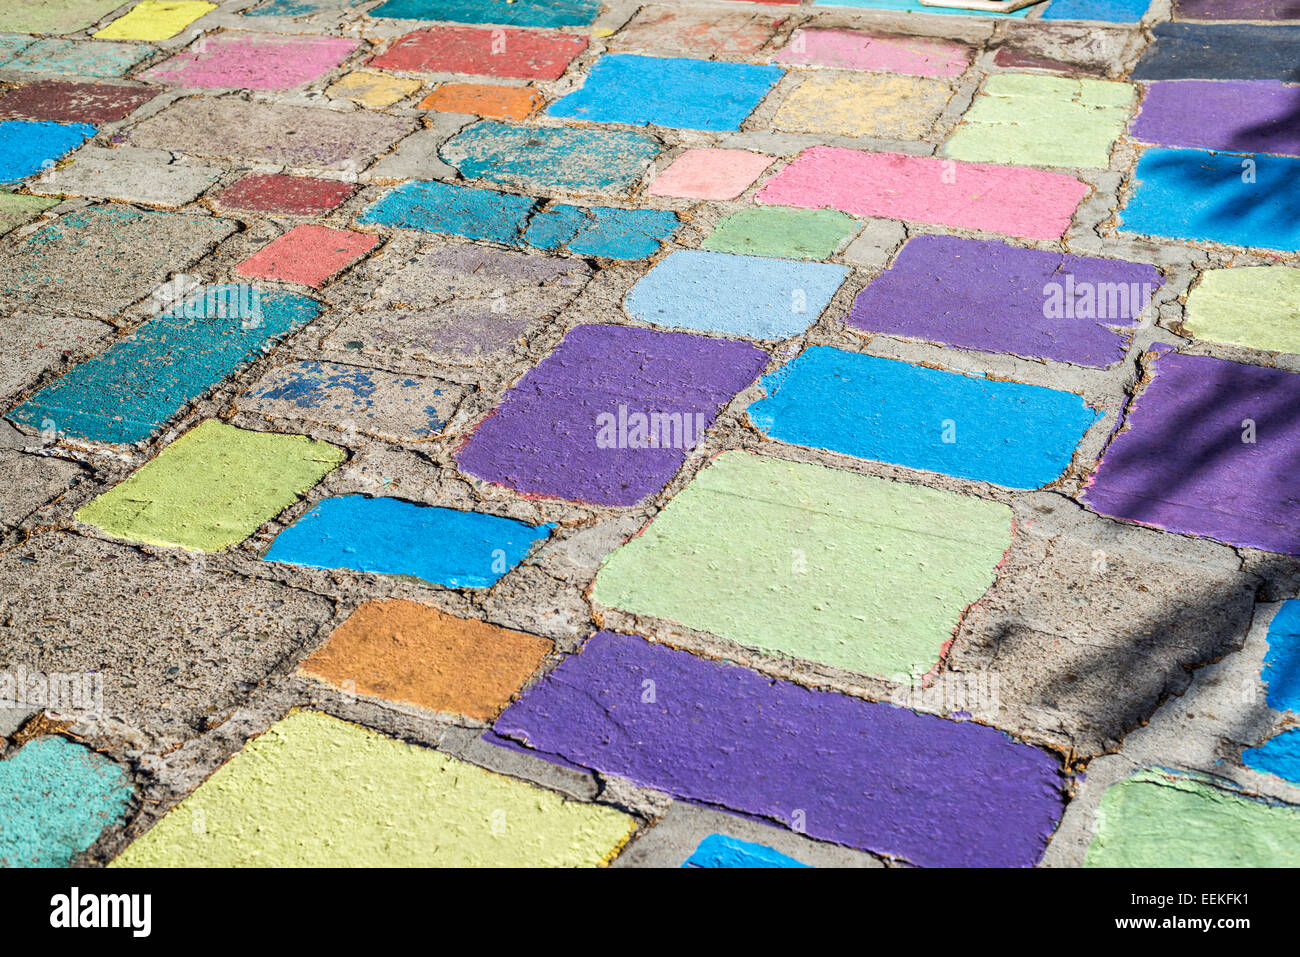 Colorful painted  patterns on cement floor. Balboa Park, San Diego, California, United States. Stock Photo